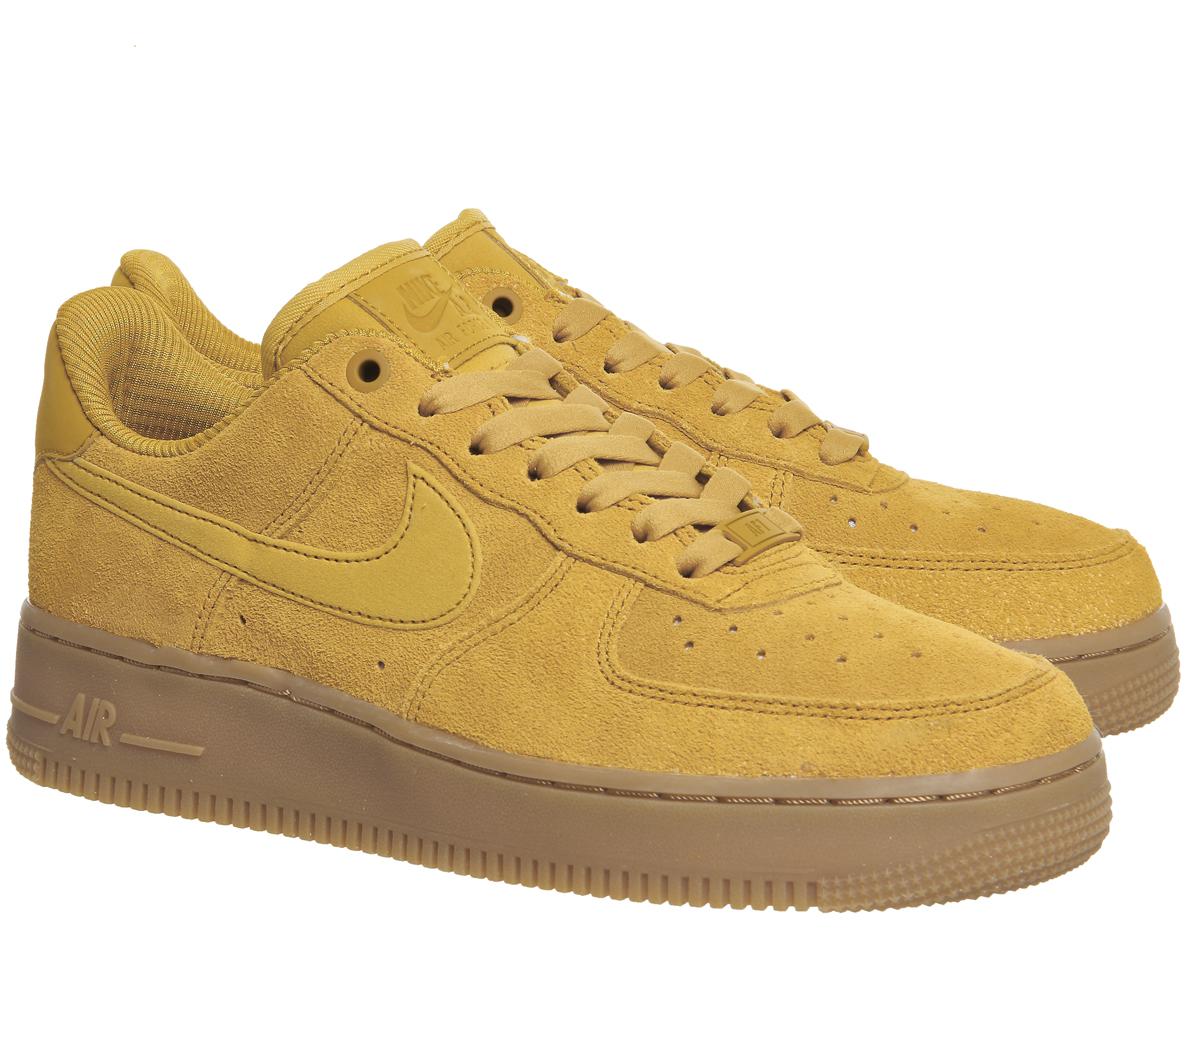 Nike Suede Air Force 1 07 Trainers in 